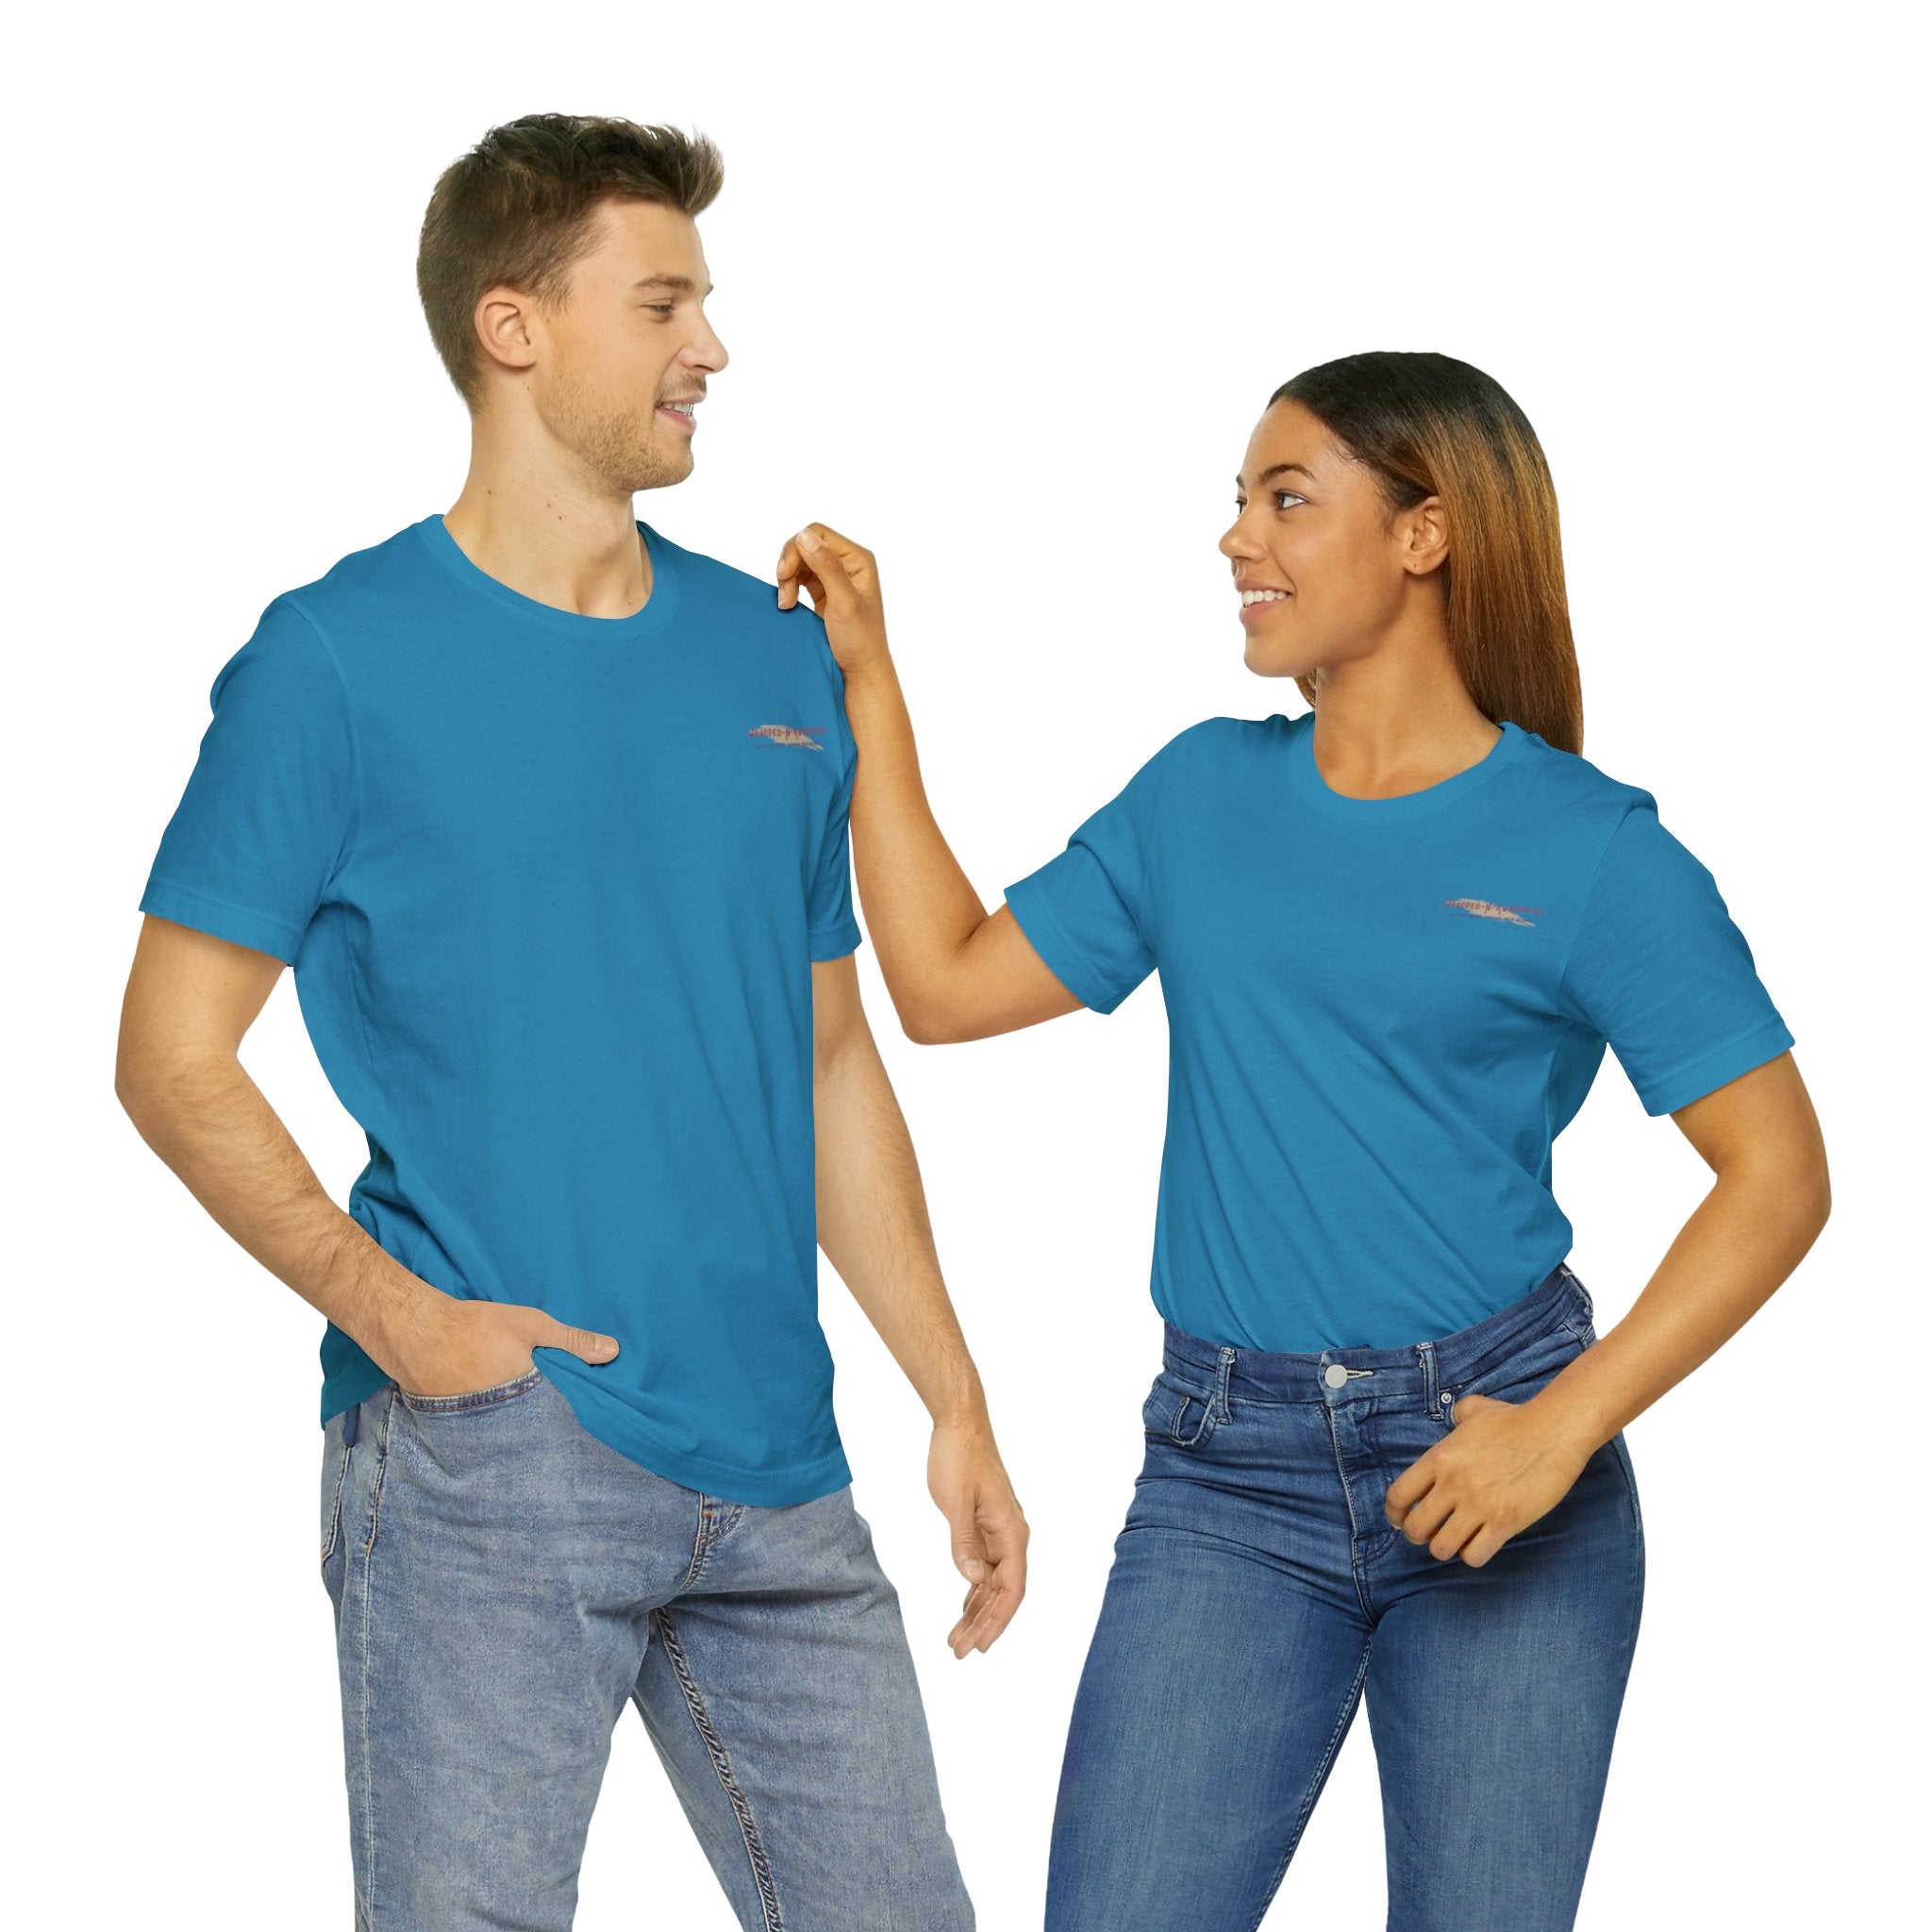 Mindfulness Heals Wounds Tee - Bella+Canvas 3001 Turquoise Airlume Cotton Bella+Canvas 3001 Crew Neckline Jersey Short Sleeve Lightweight Fabric Mental Health Support Retail Fit Tear-away Label Tee Unisex Tee T-Shirt 3969418008127085692_2048 Printify